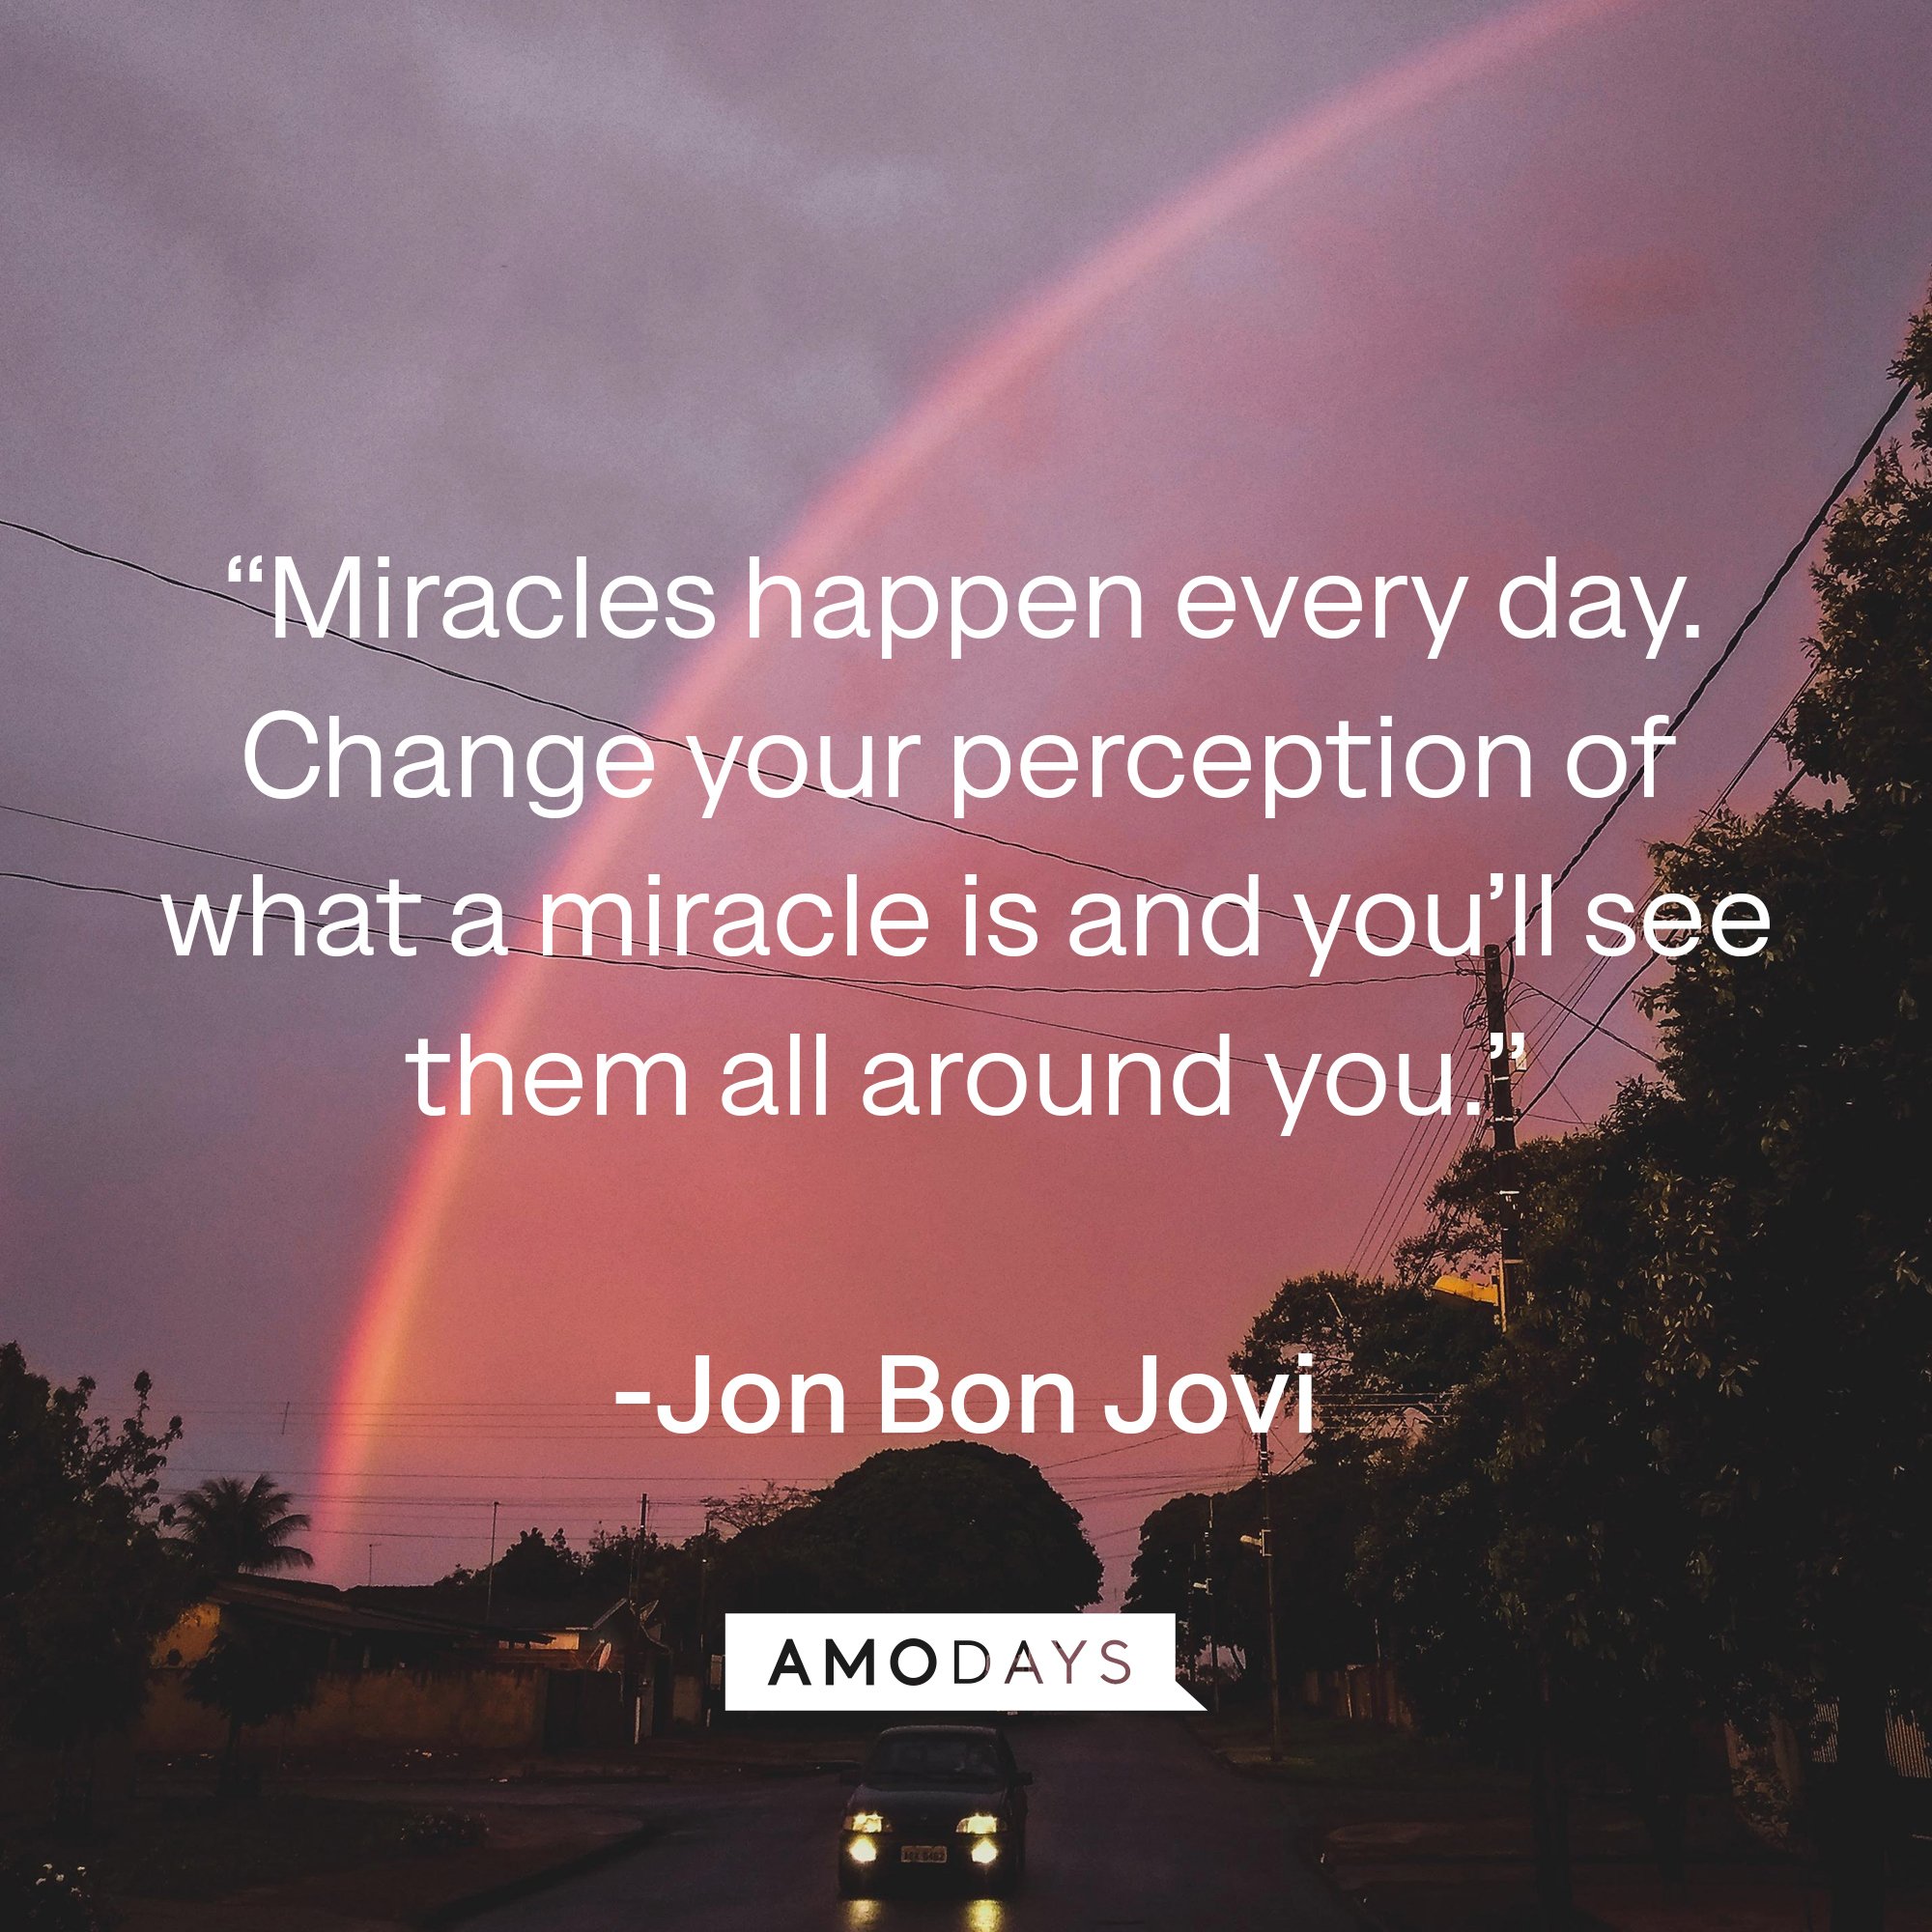 Jon Bon Jovi's quote: Miracles happen every day. Change your perception of what a miracle is and you’ll see them all around you.”  | Image: AmoDays